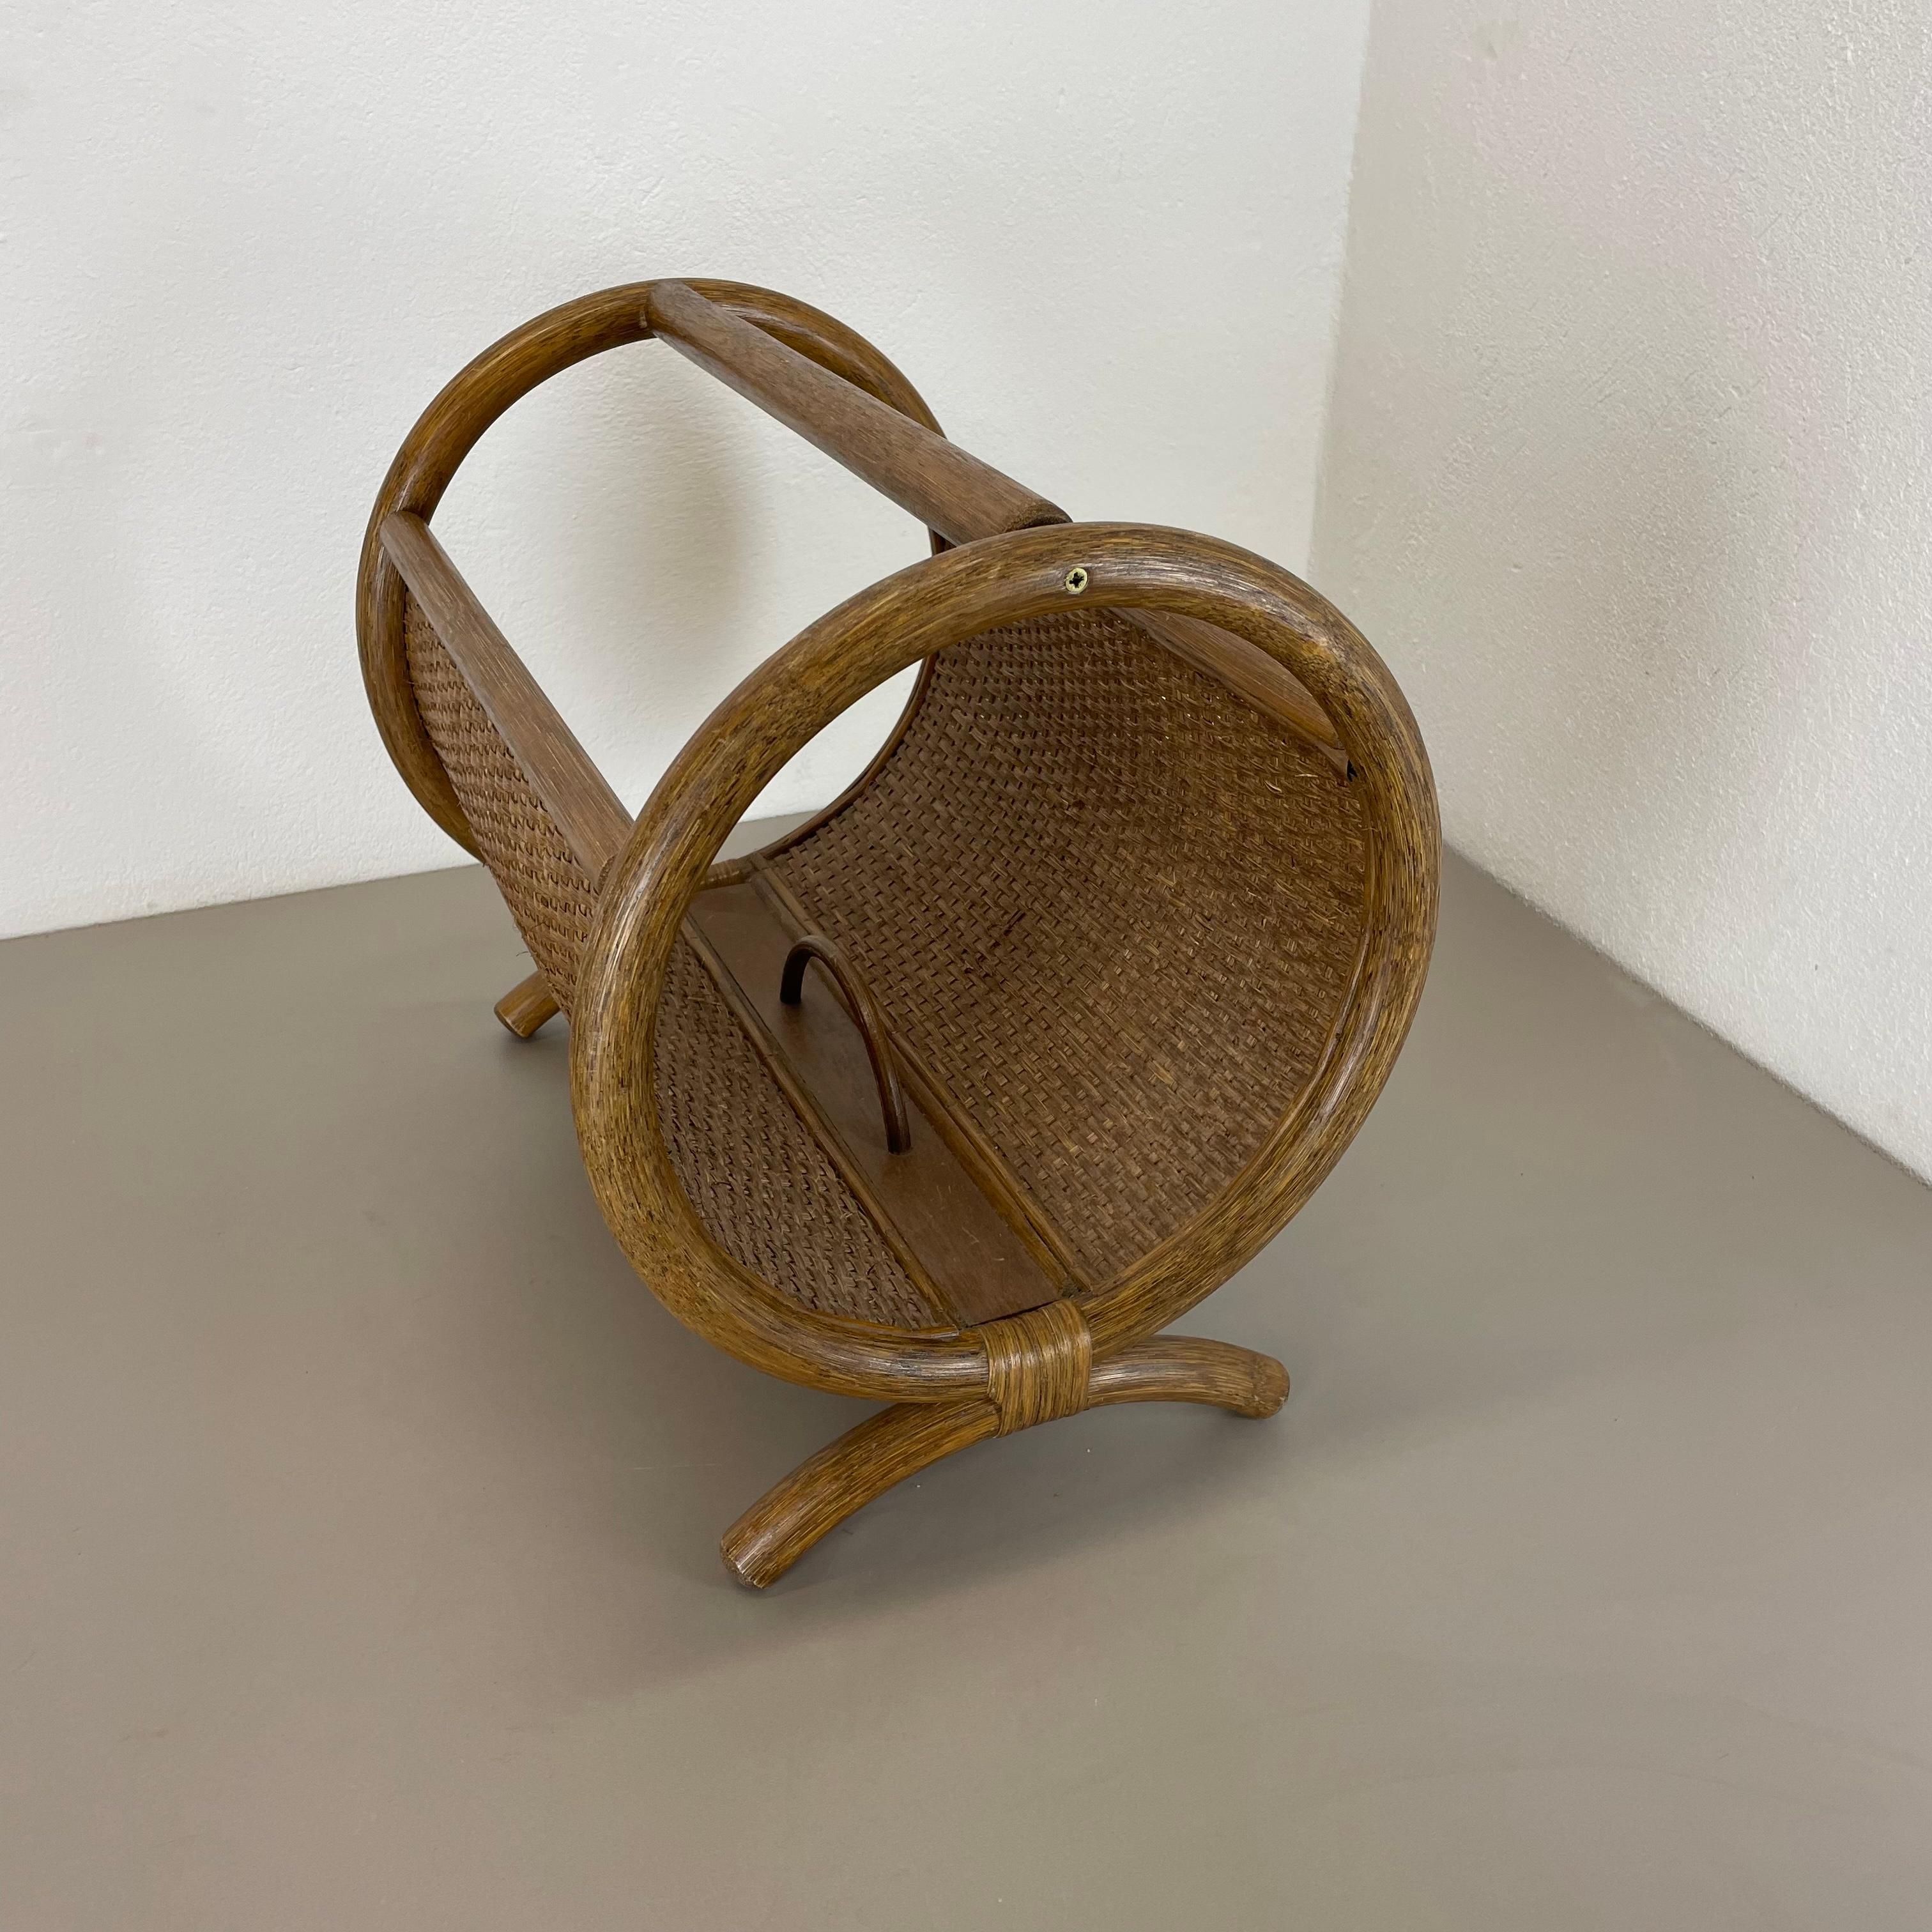 Aubock Style Mid-century Wood and Rattan Bauhaus Magazine Holder, France, 1980s For Sale 11